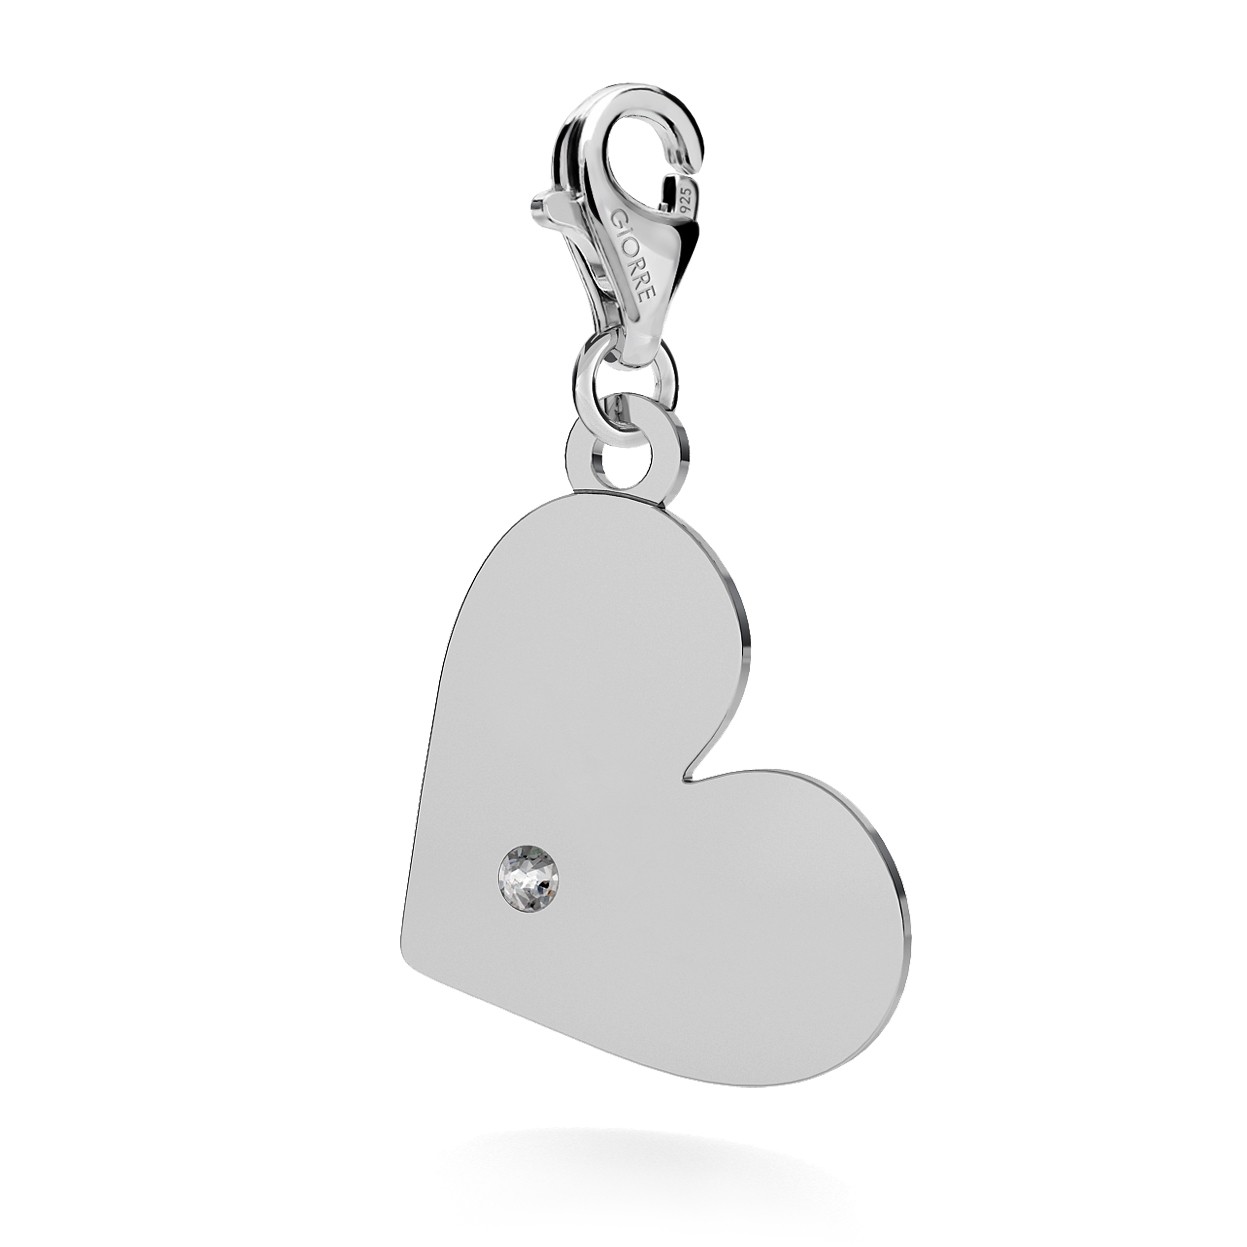 CHARM 101, HEART WITH ENGRAVE, SWAROVSKI 2038 SS 6, STERLING SILVER (925) RHODIUM OR GOLD PLATED